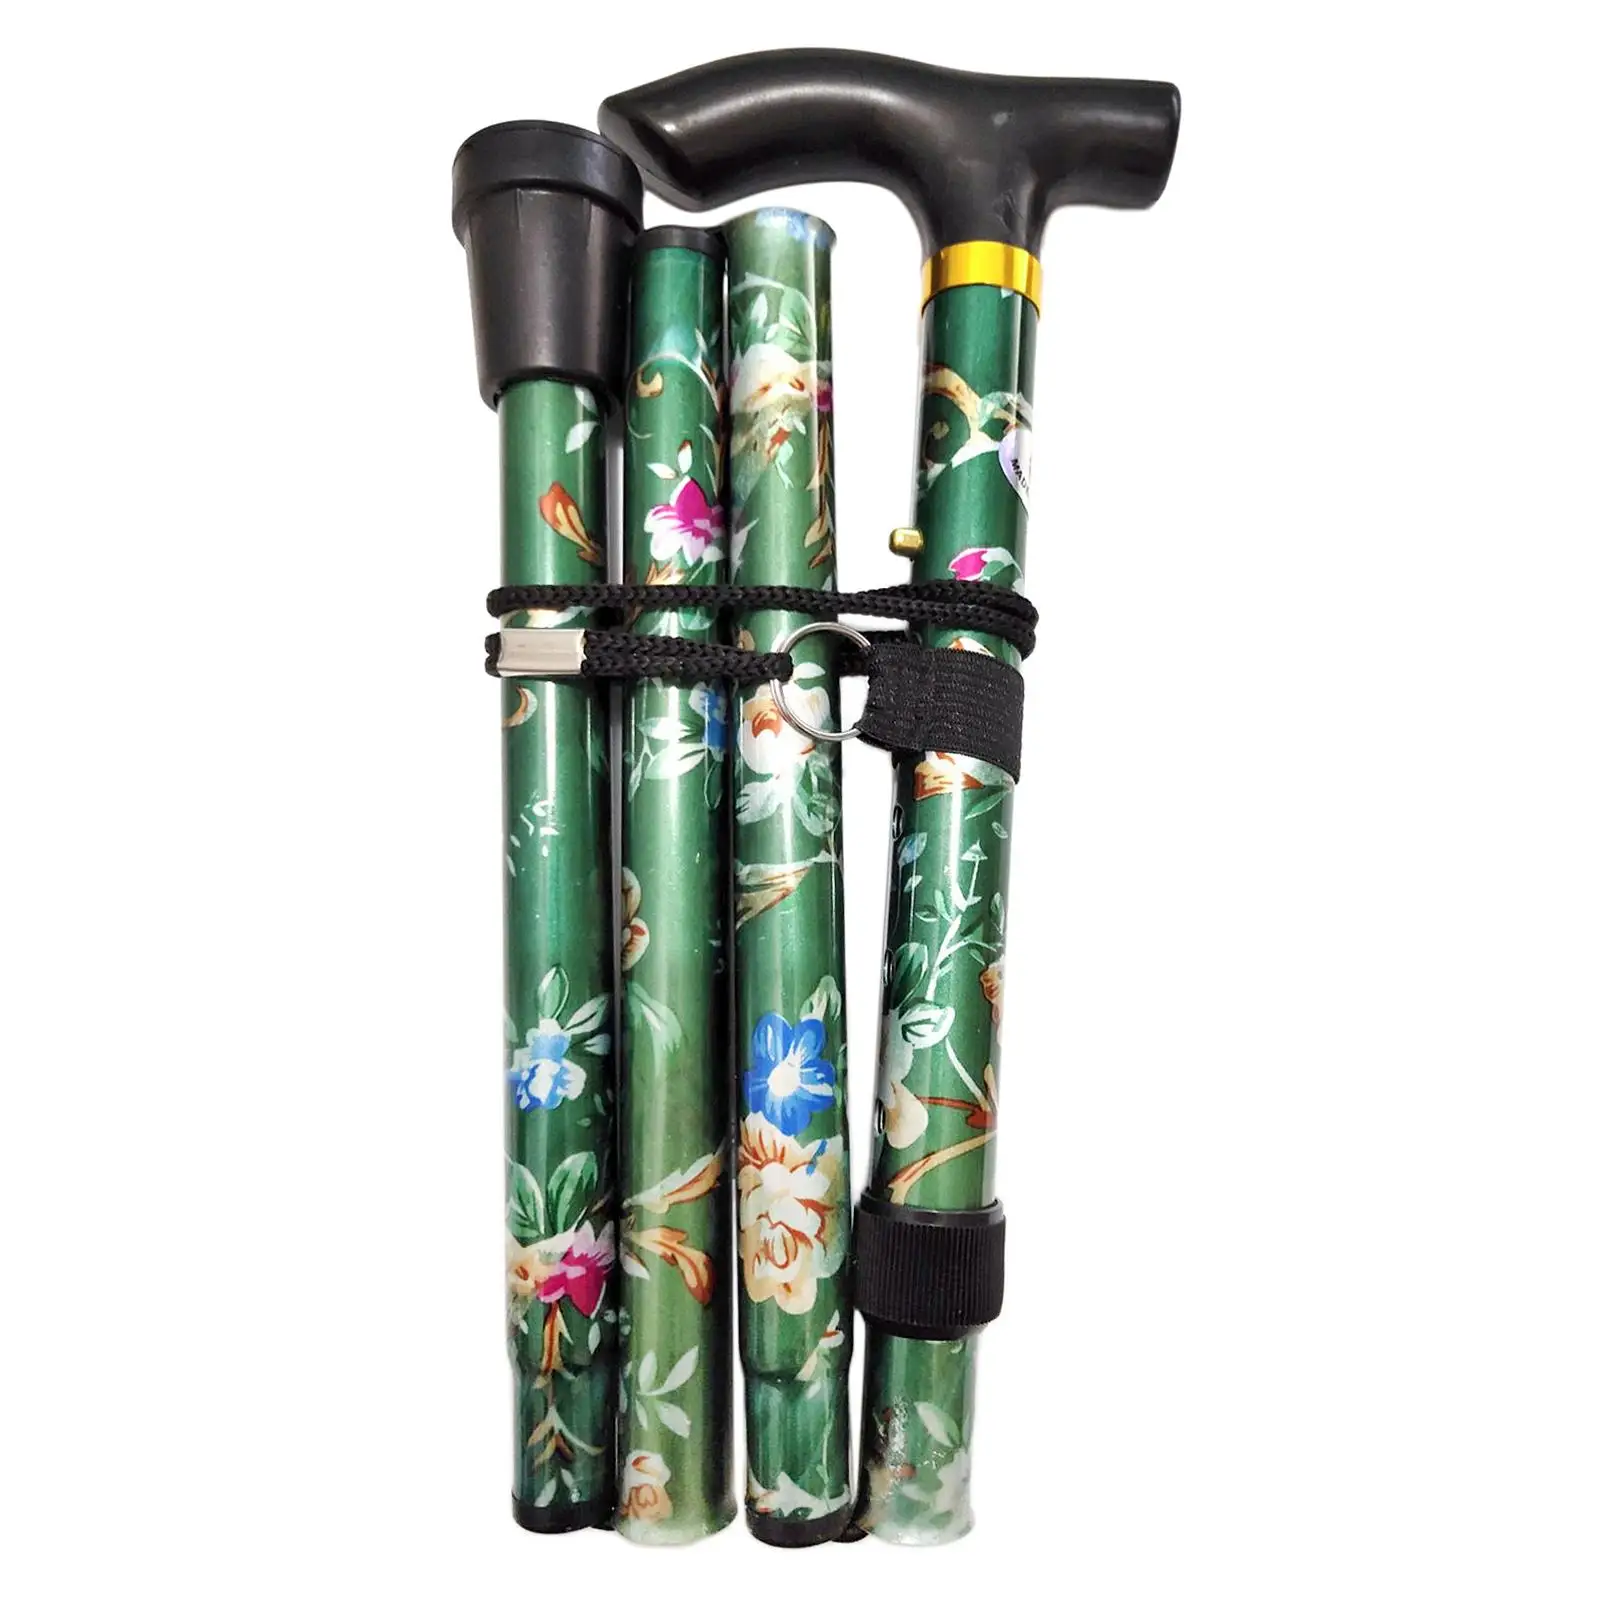 Portable Foldable Cane Aluminum 5-Section Hand Walking Stick Camping Hiking